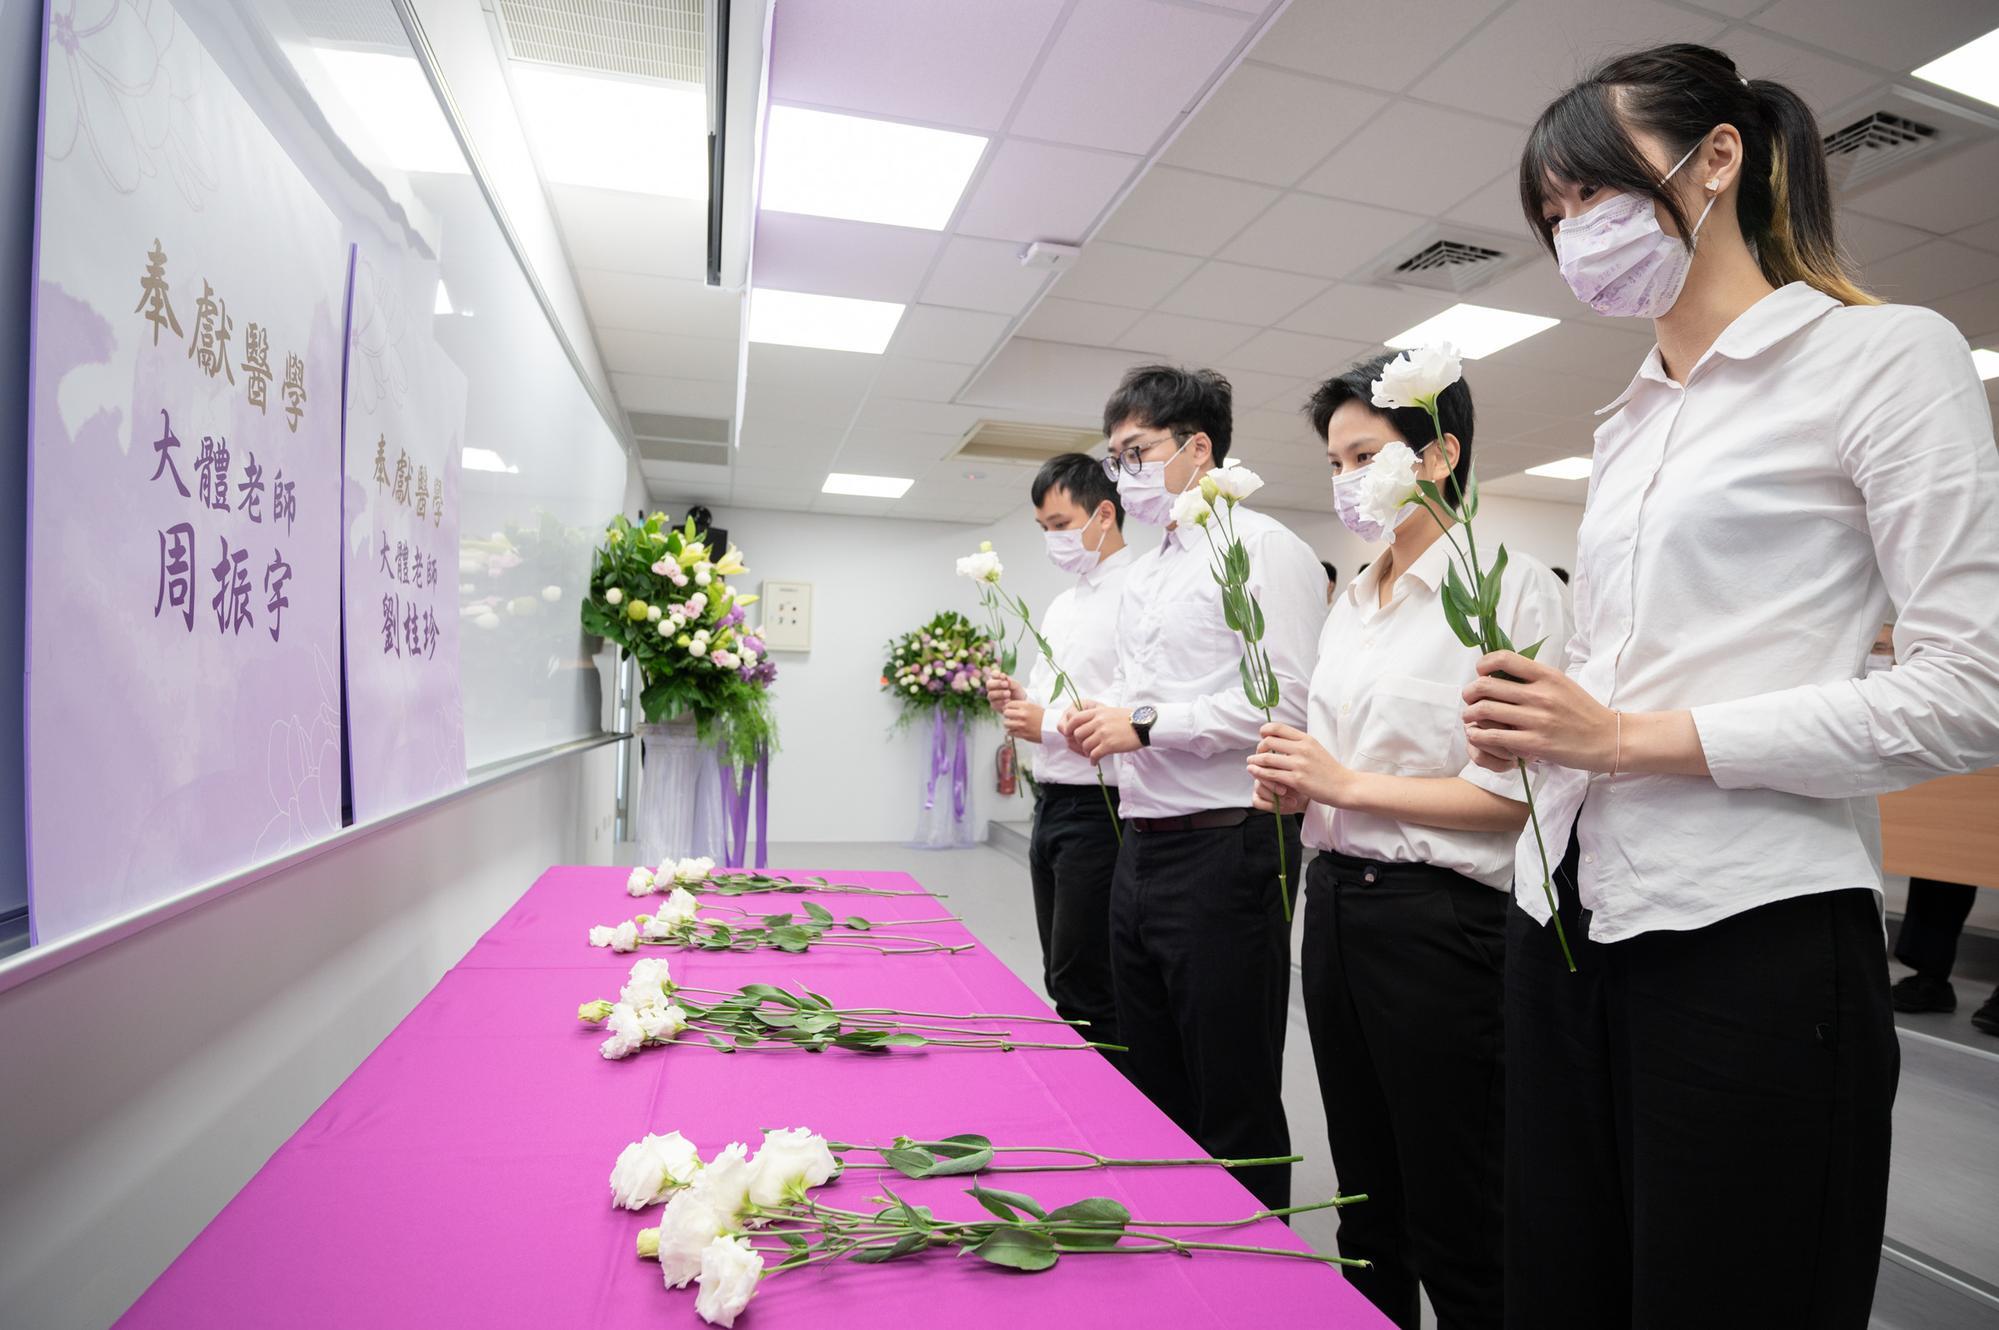 Students of the Post-baccalaureate Program in Medicine at NTHU offering Chinese bellflowers to those who have donated their cadavers to the program.